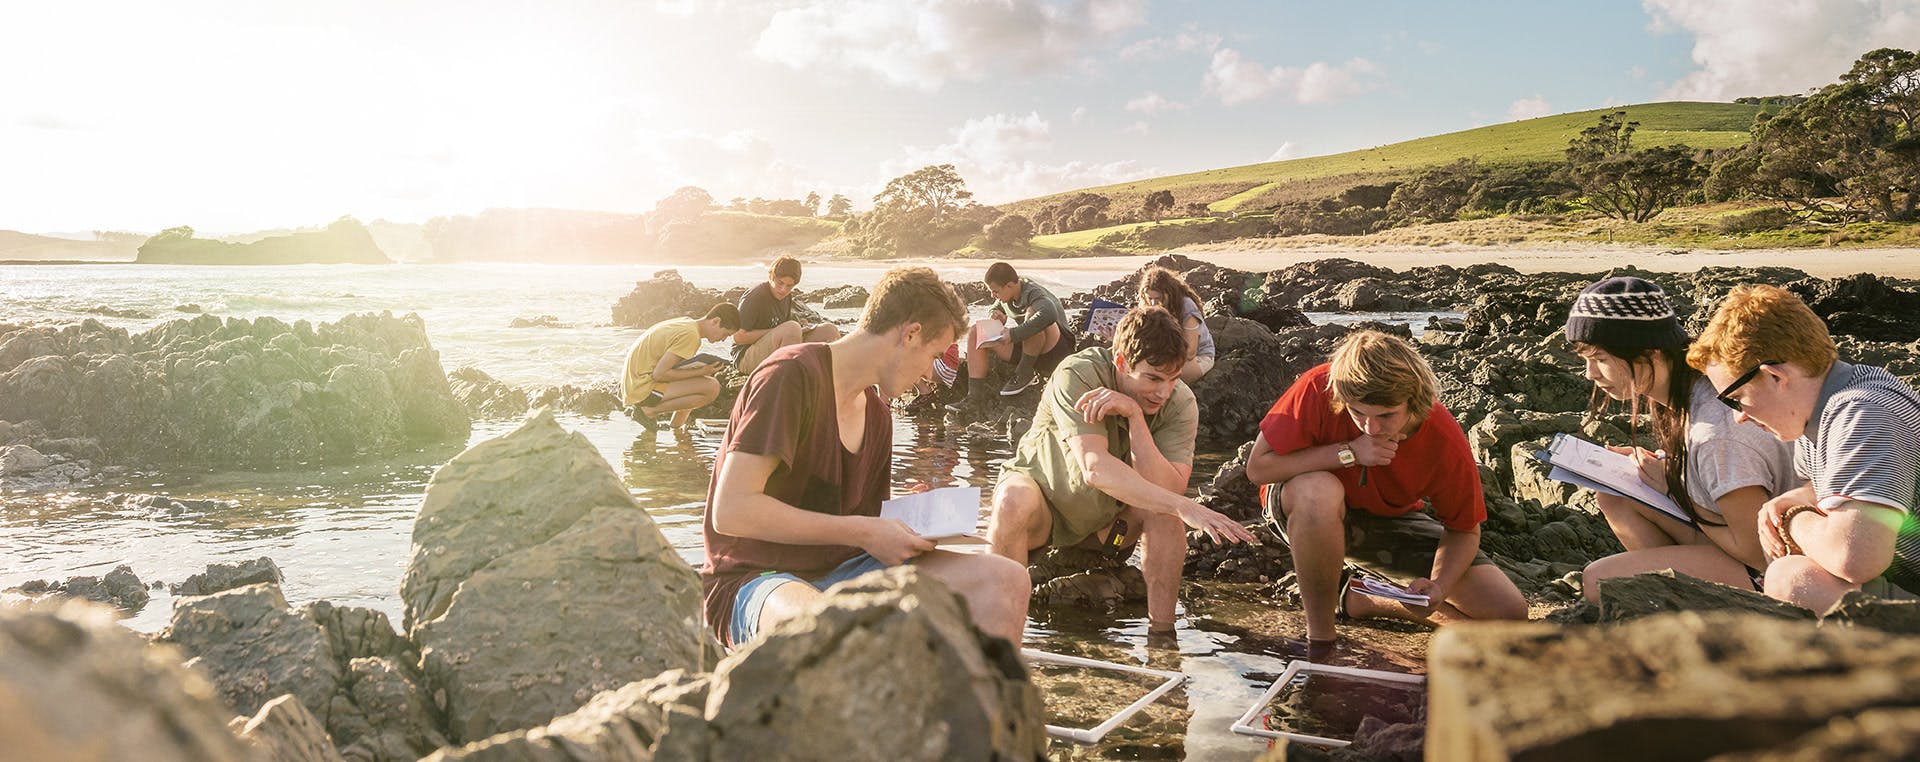 School students studying sea life in a rock pool